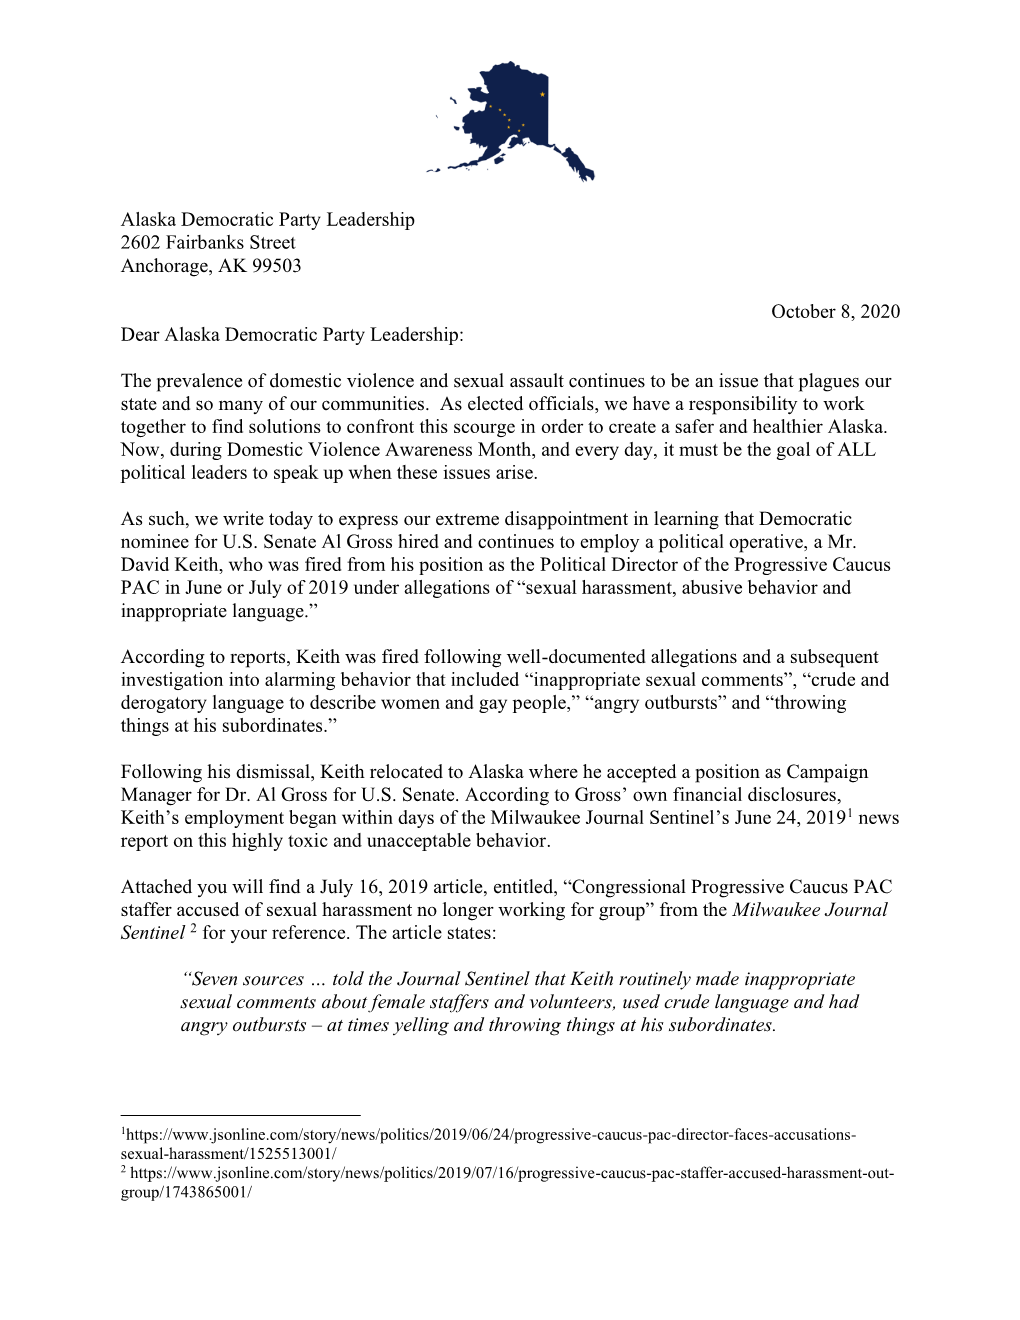 Sent a Letter to the Alaska Democratic Party Leadership Voicing Their Serious Concerns